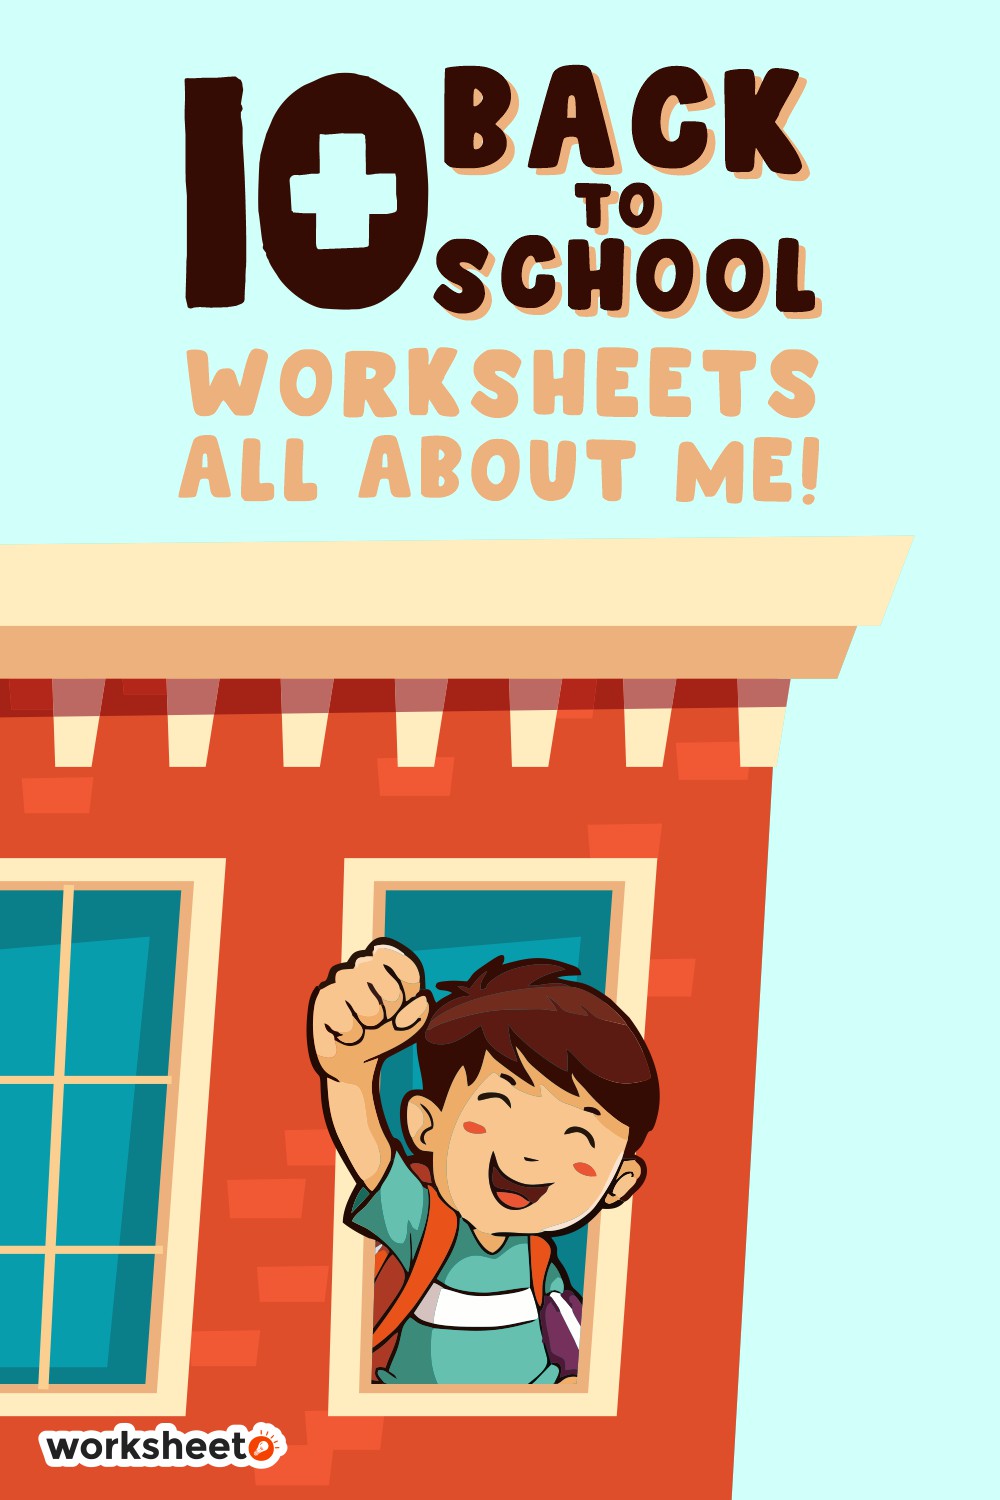 12 Images of Back To School Worksheets All About Me